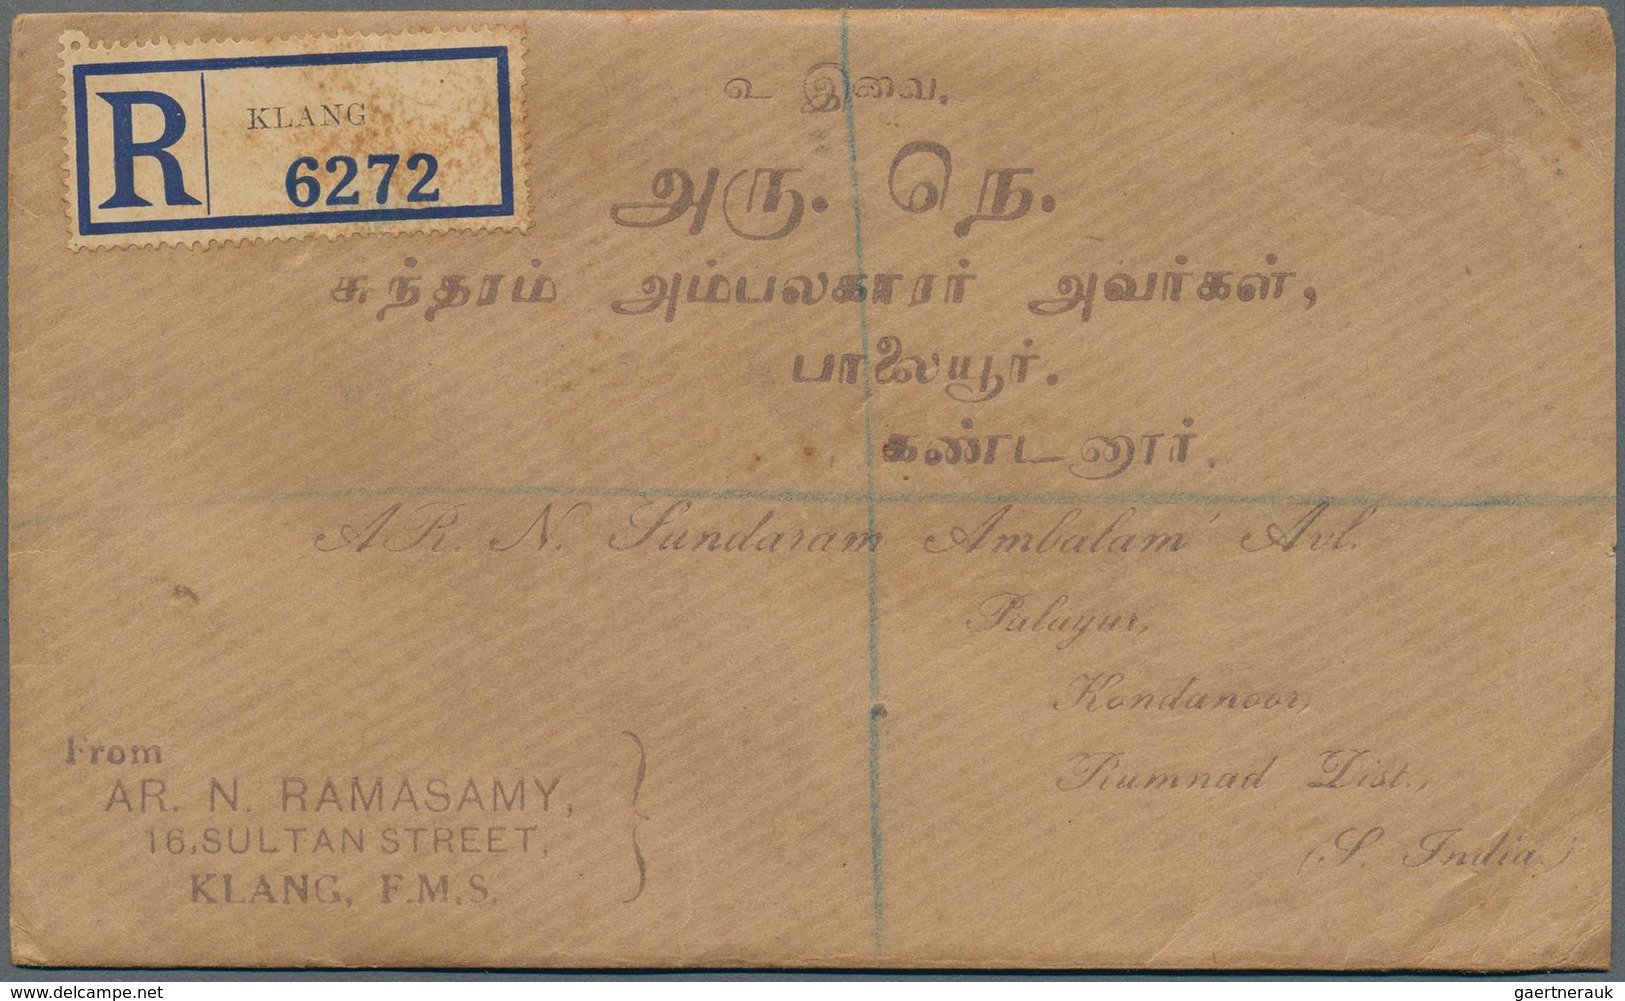 Malaiische Staaten - Selangor: 1938-39, Four registered covers from Klang (3) and Kuala Lumpur to In